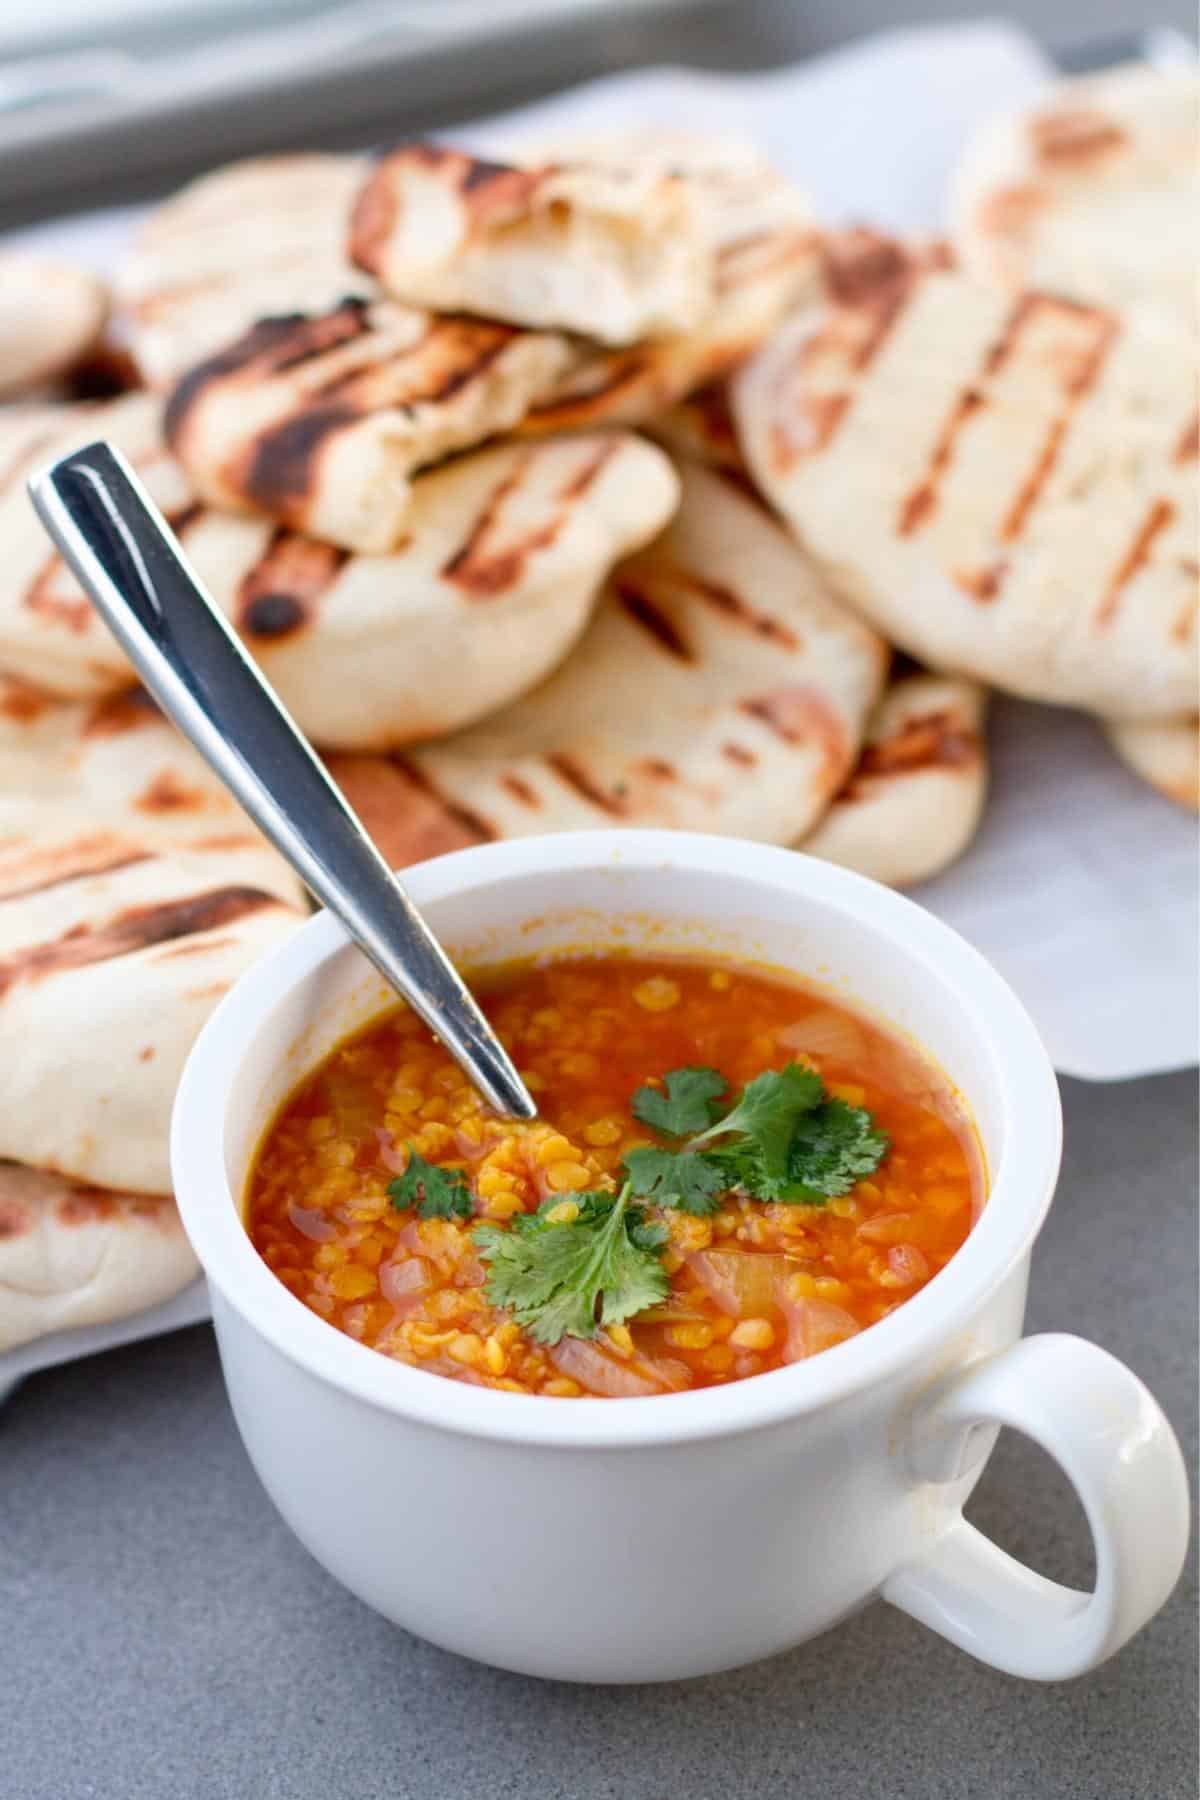 Cup of cooked red lentils with naan bread in the background